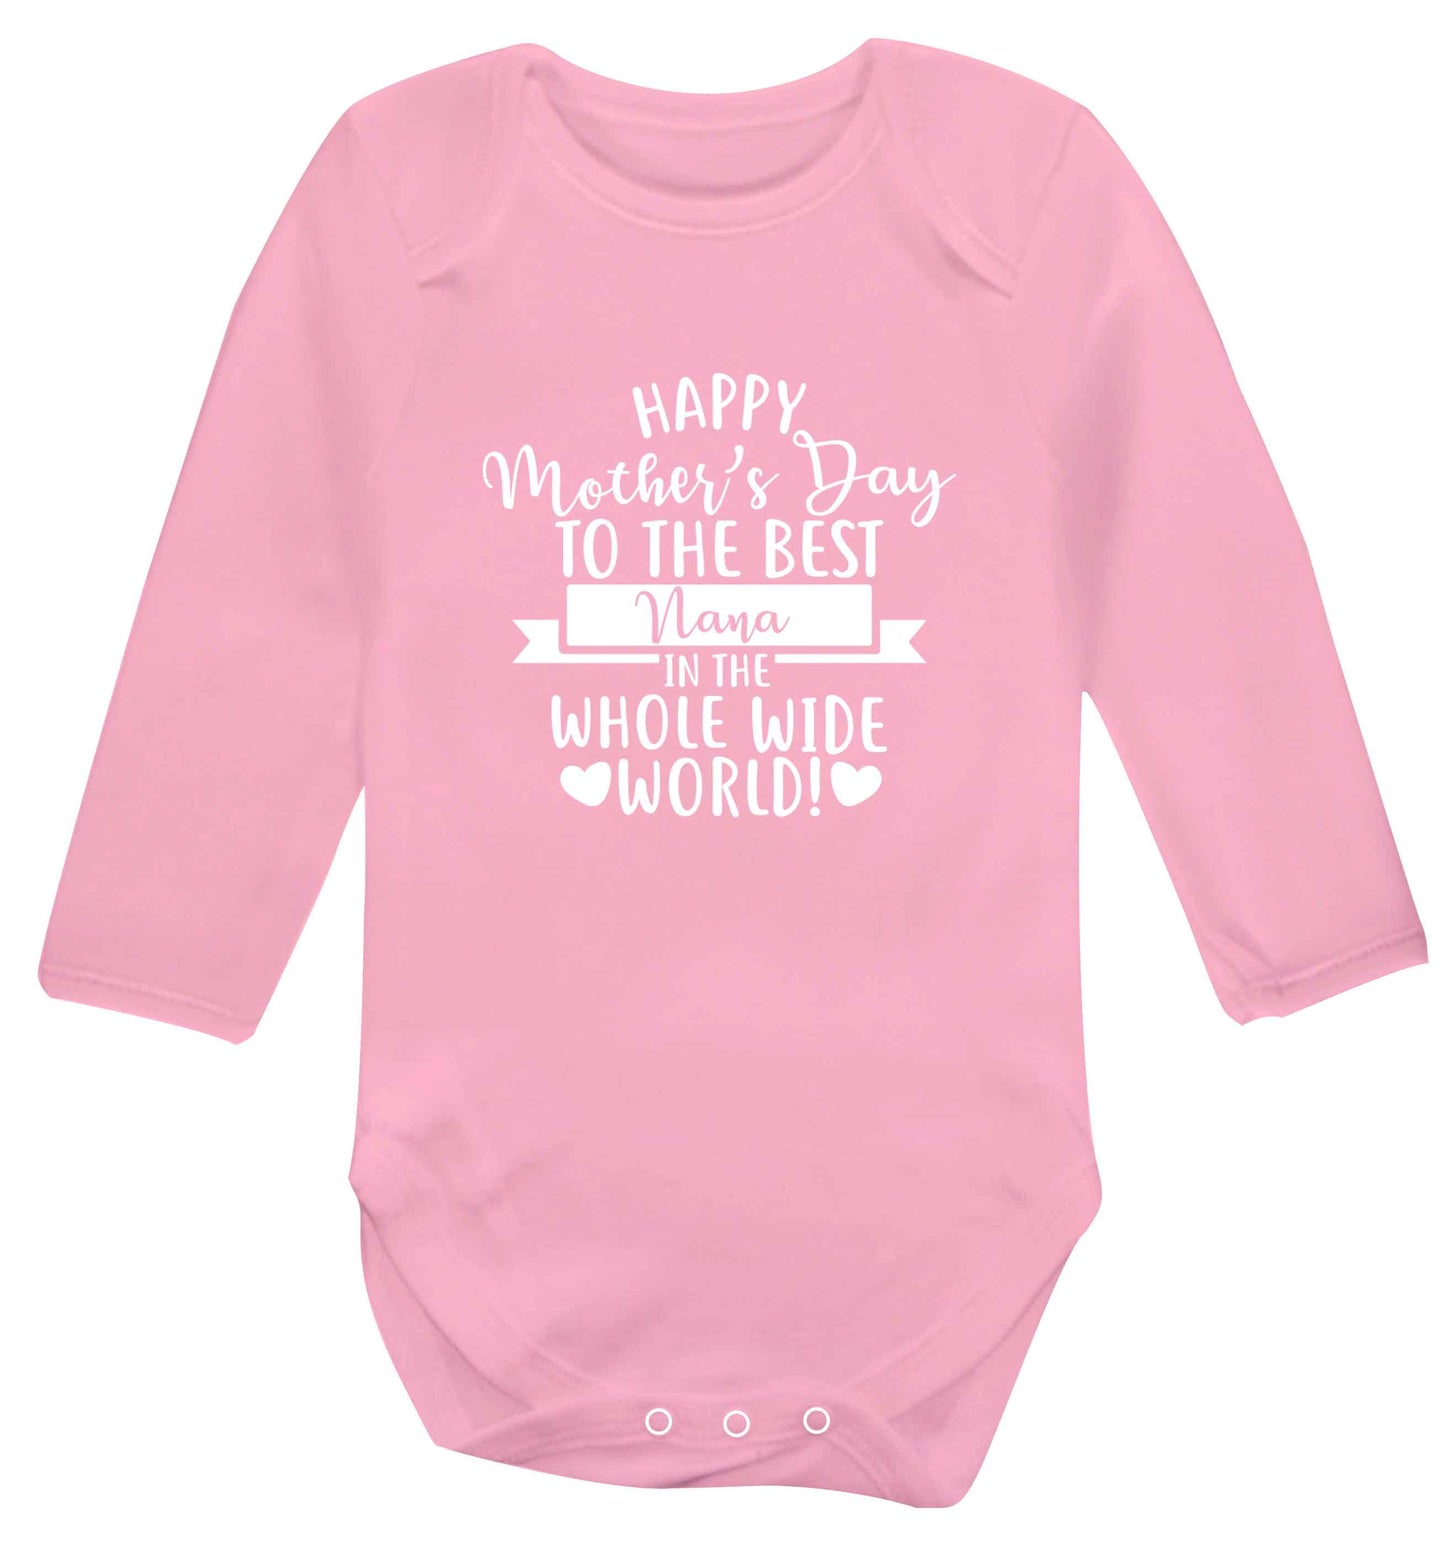 Happy mother's day to the best nana in the world baby vest long sleeved pale pink 6-12 months